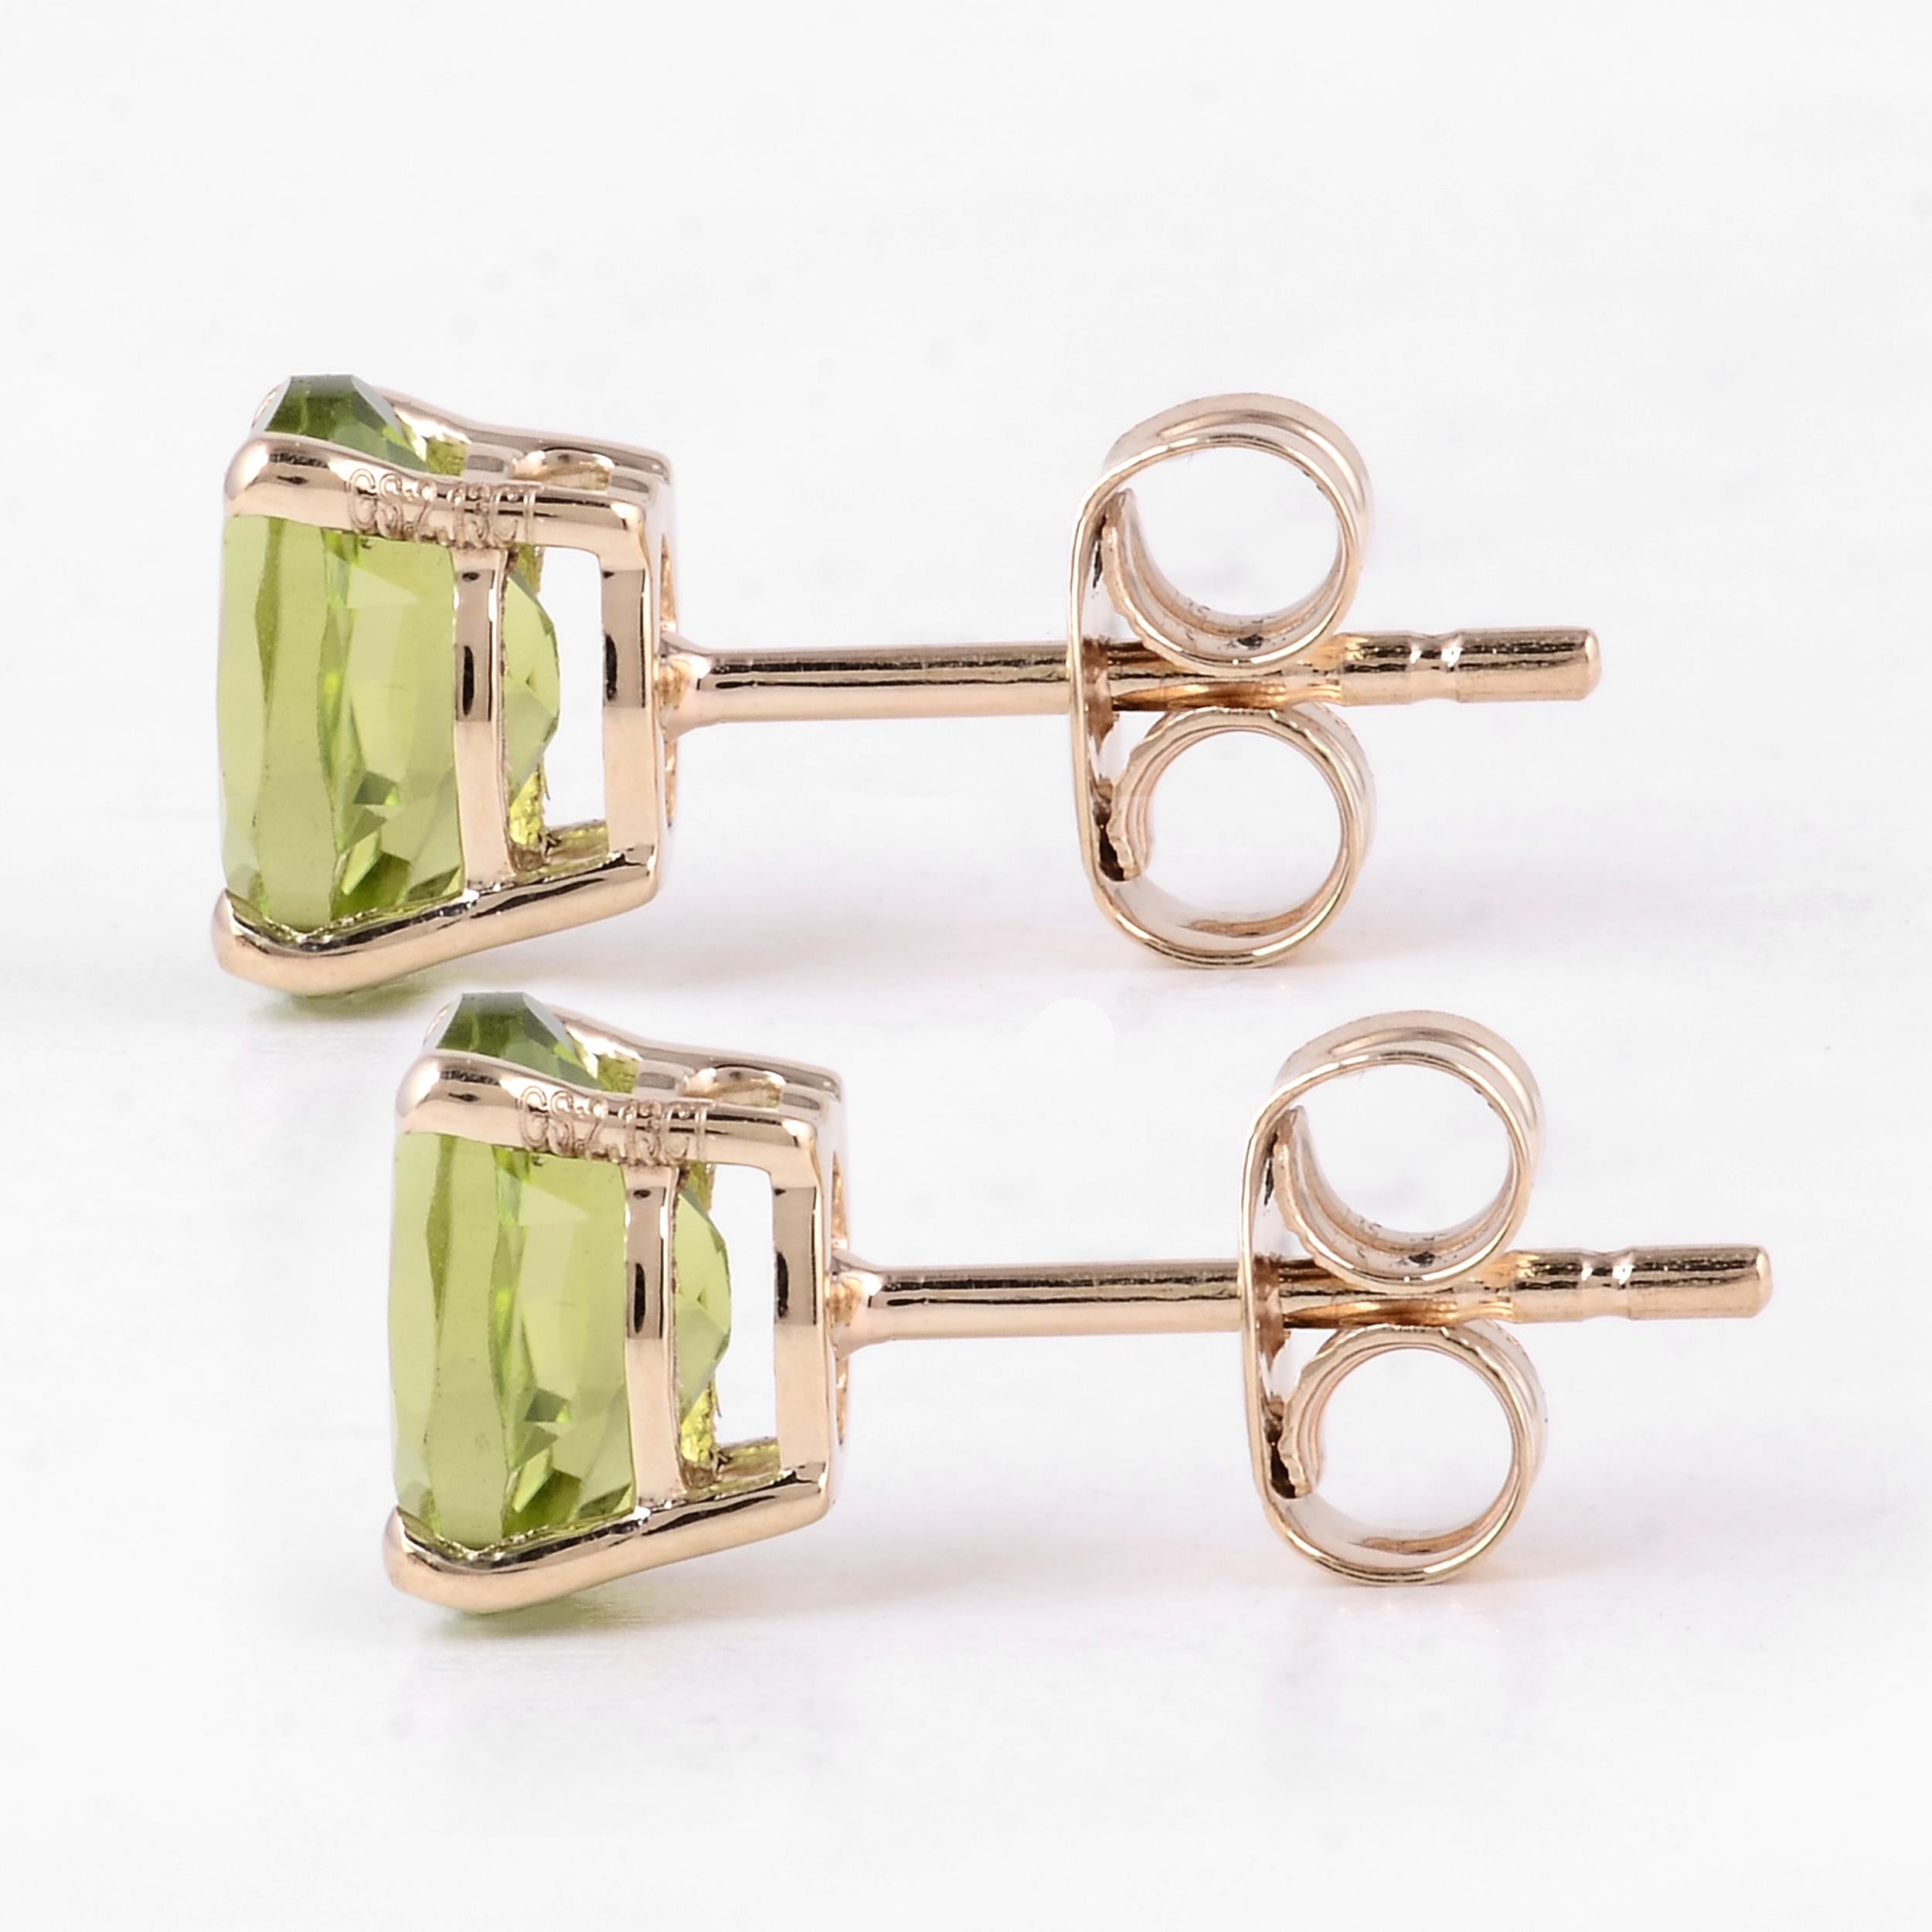 14K 2.13ctw Peridot Stud Earrings - Vibrant Gemstones, Elegant Design, Timeless In New Condition For Sale In Holtsville, NY